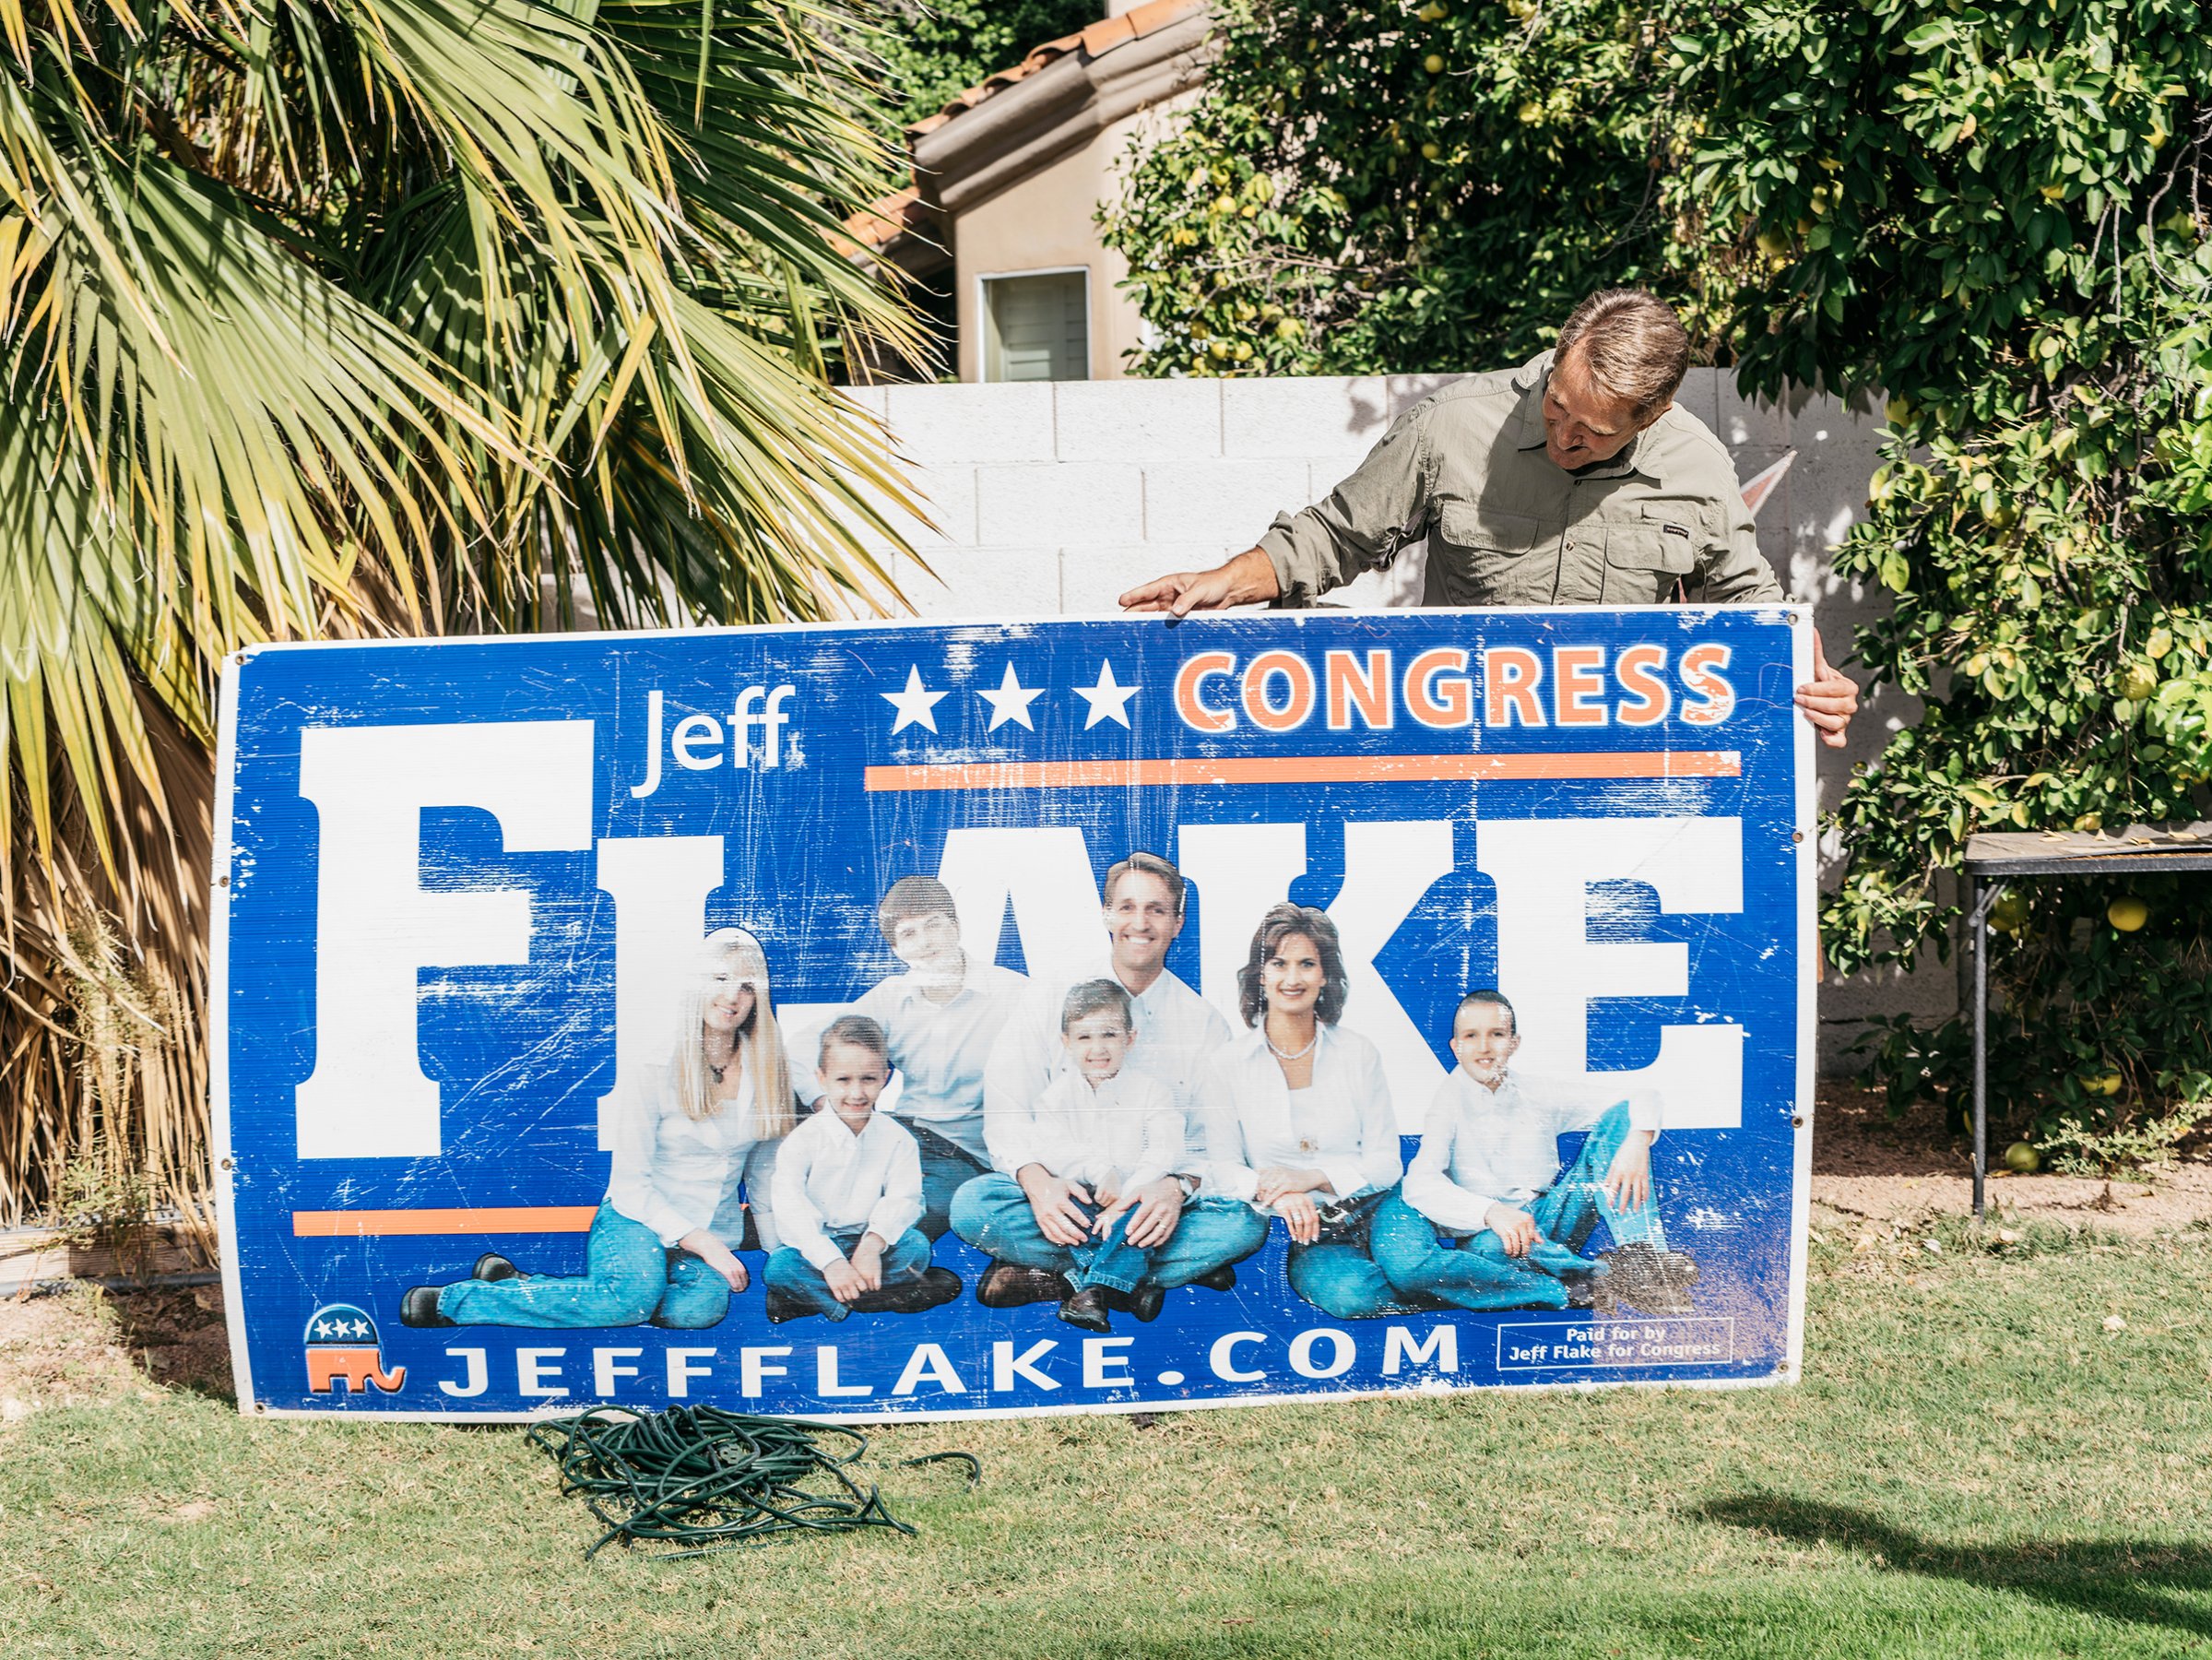 Jess Flake holds an old campaign sign in his backyard, Mesa, Ariz.